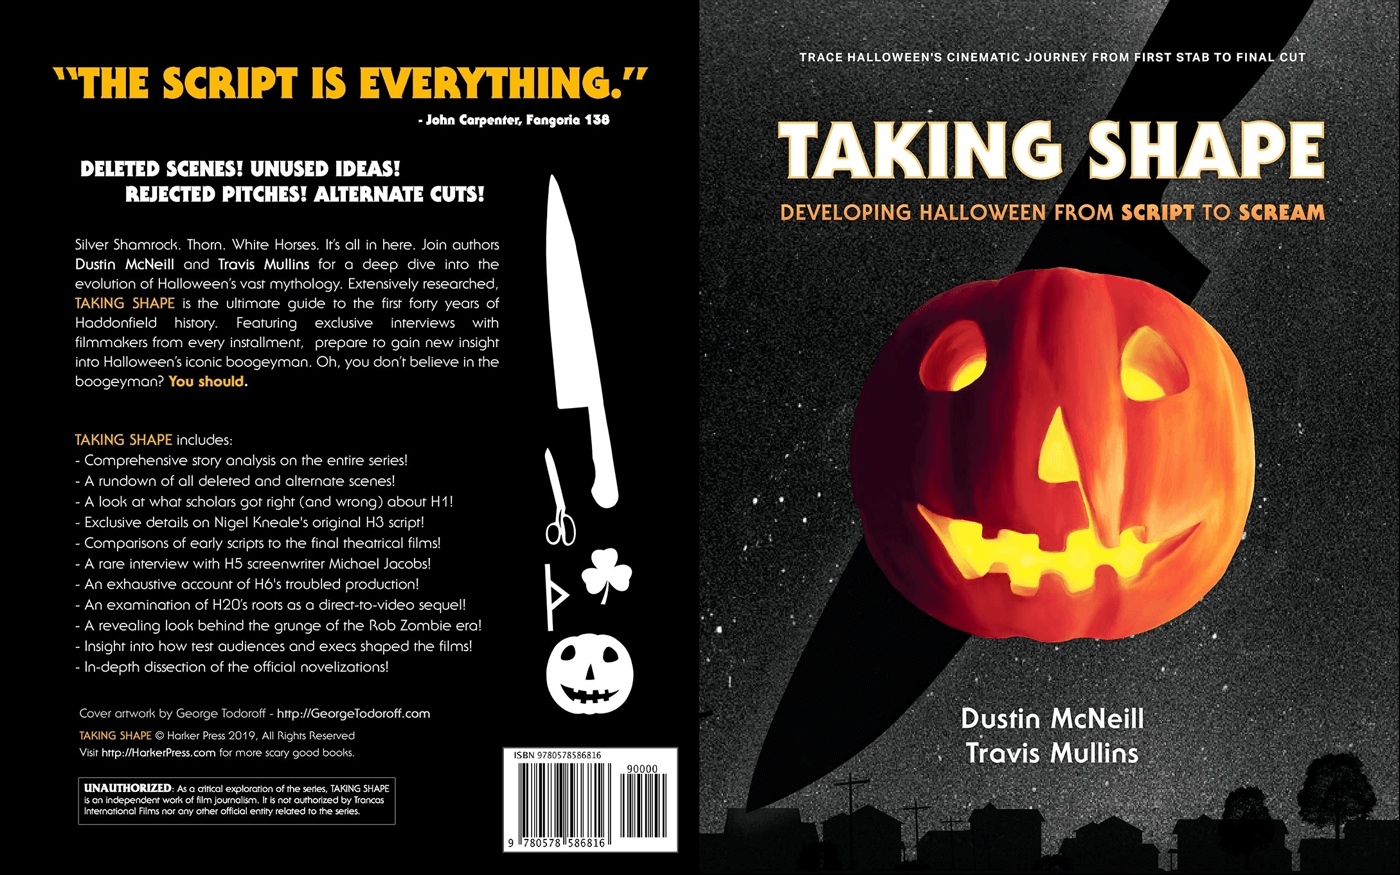 This is a black book cover with an orange pumpkin and is called Taking Shape: Halloween From Script to Screen by Dustin McNeill and Travis Mullins